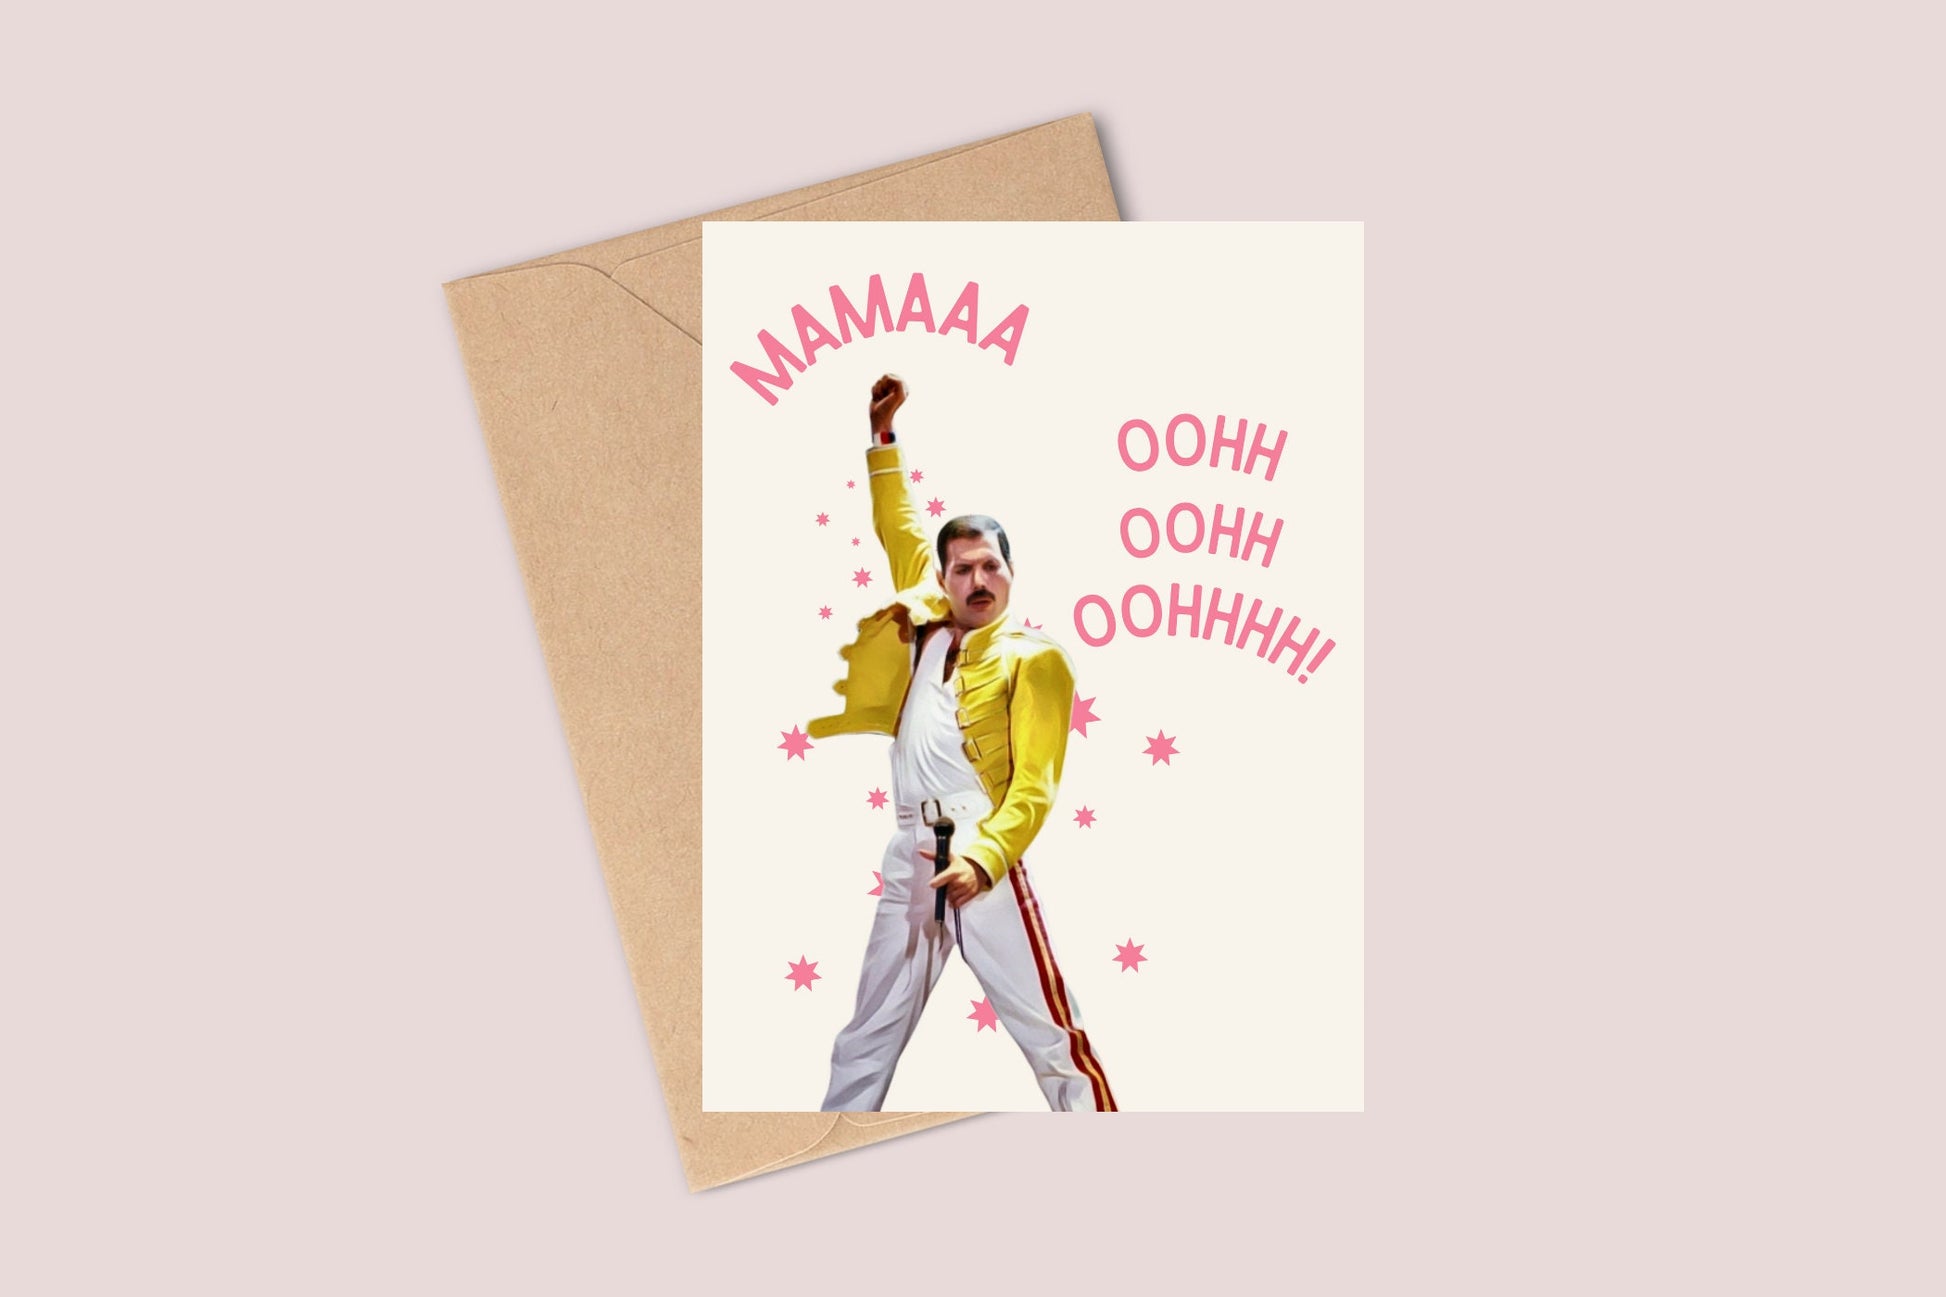 Freddy Mercury Mothers Day Card, Queen Freddie Mercury Card, Funny Card, Mothers Day, Bohemian Rhapsody, Funny Mother's Day Cards